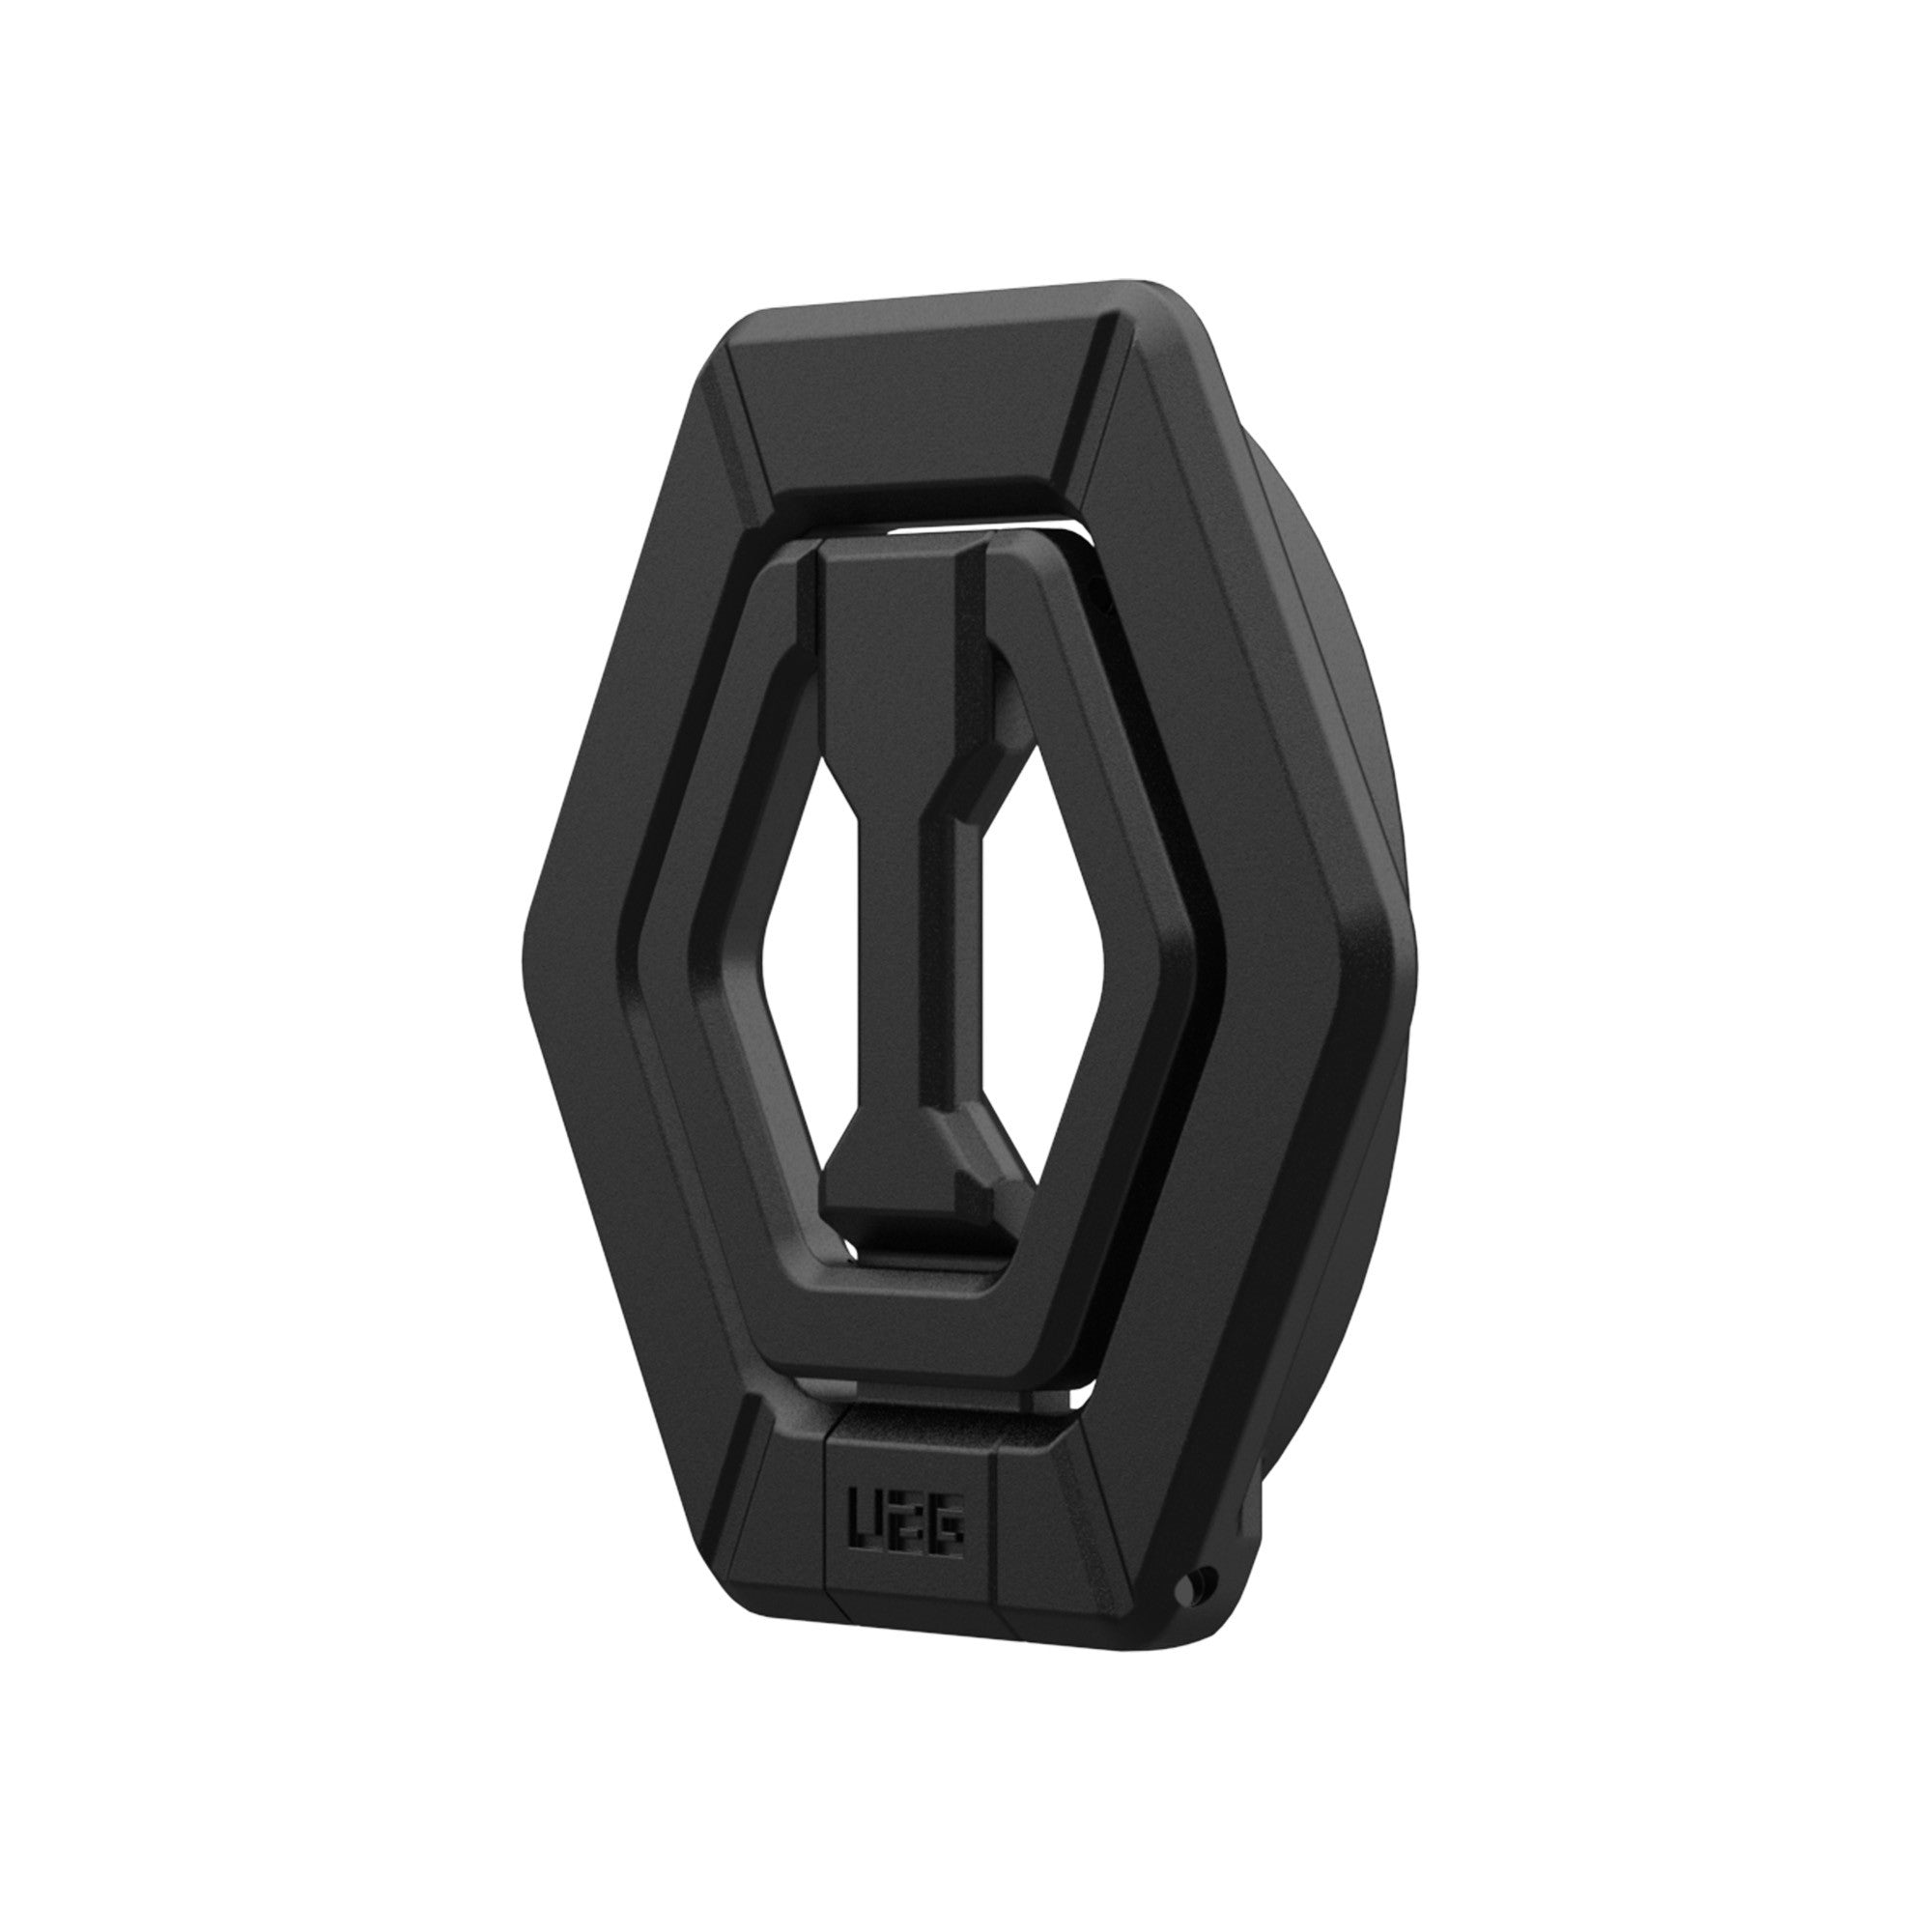 UAG Magnetic Ring Stand - Black - 15-12712